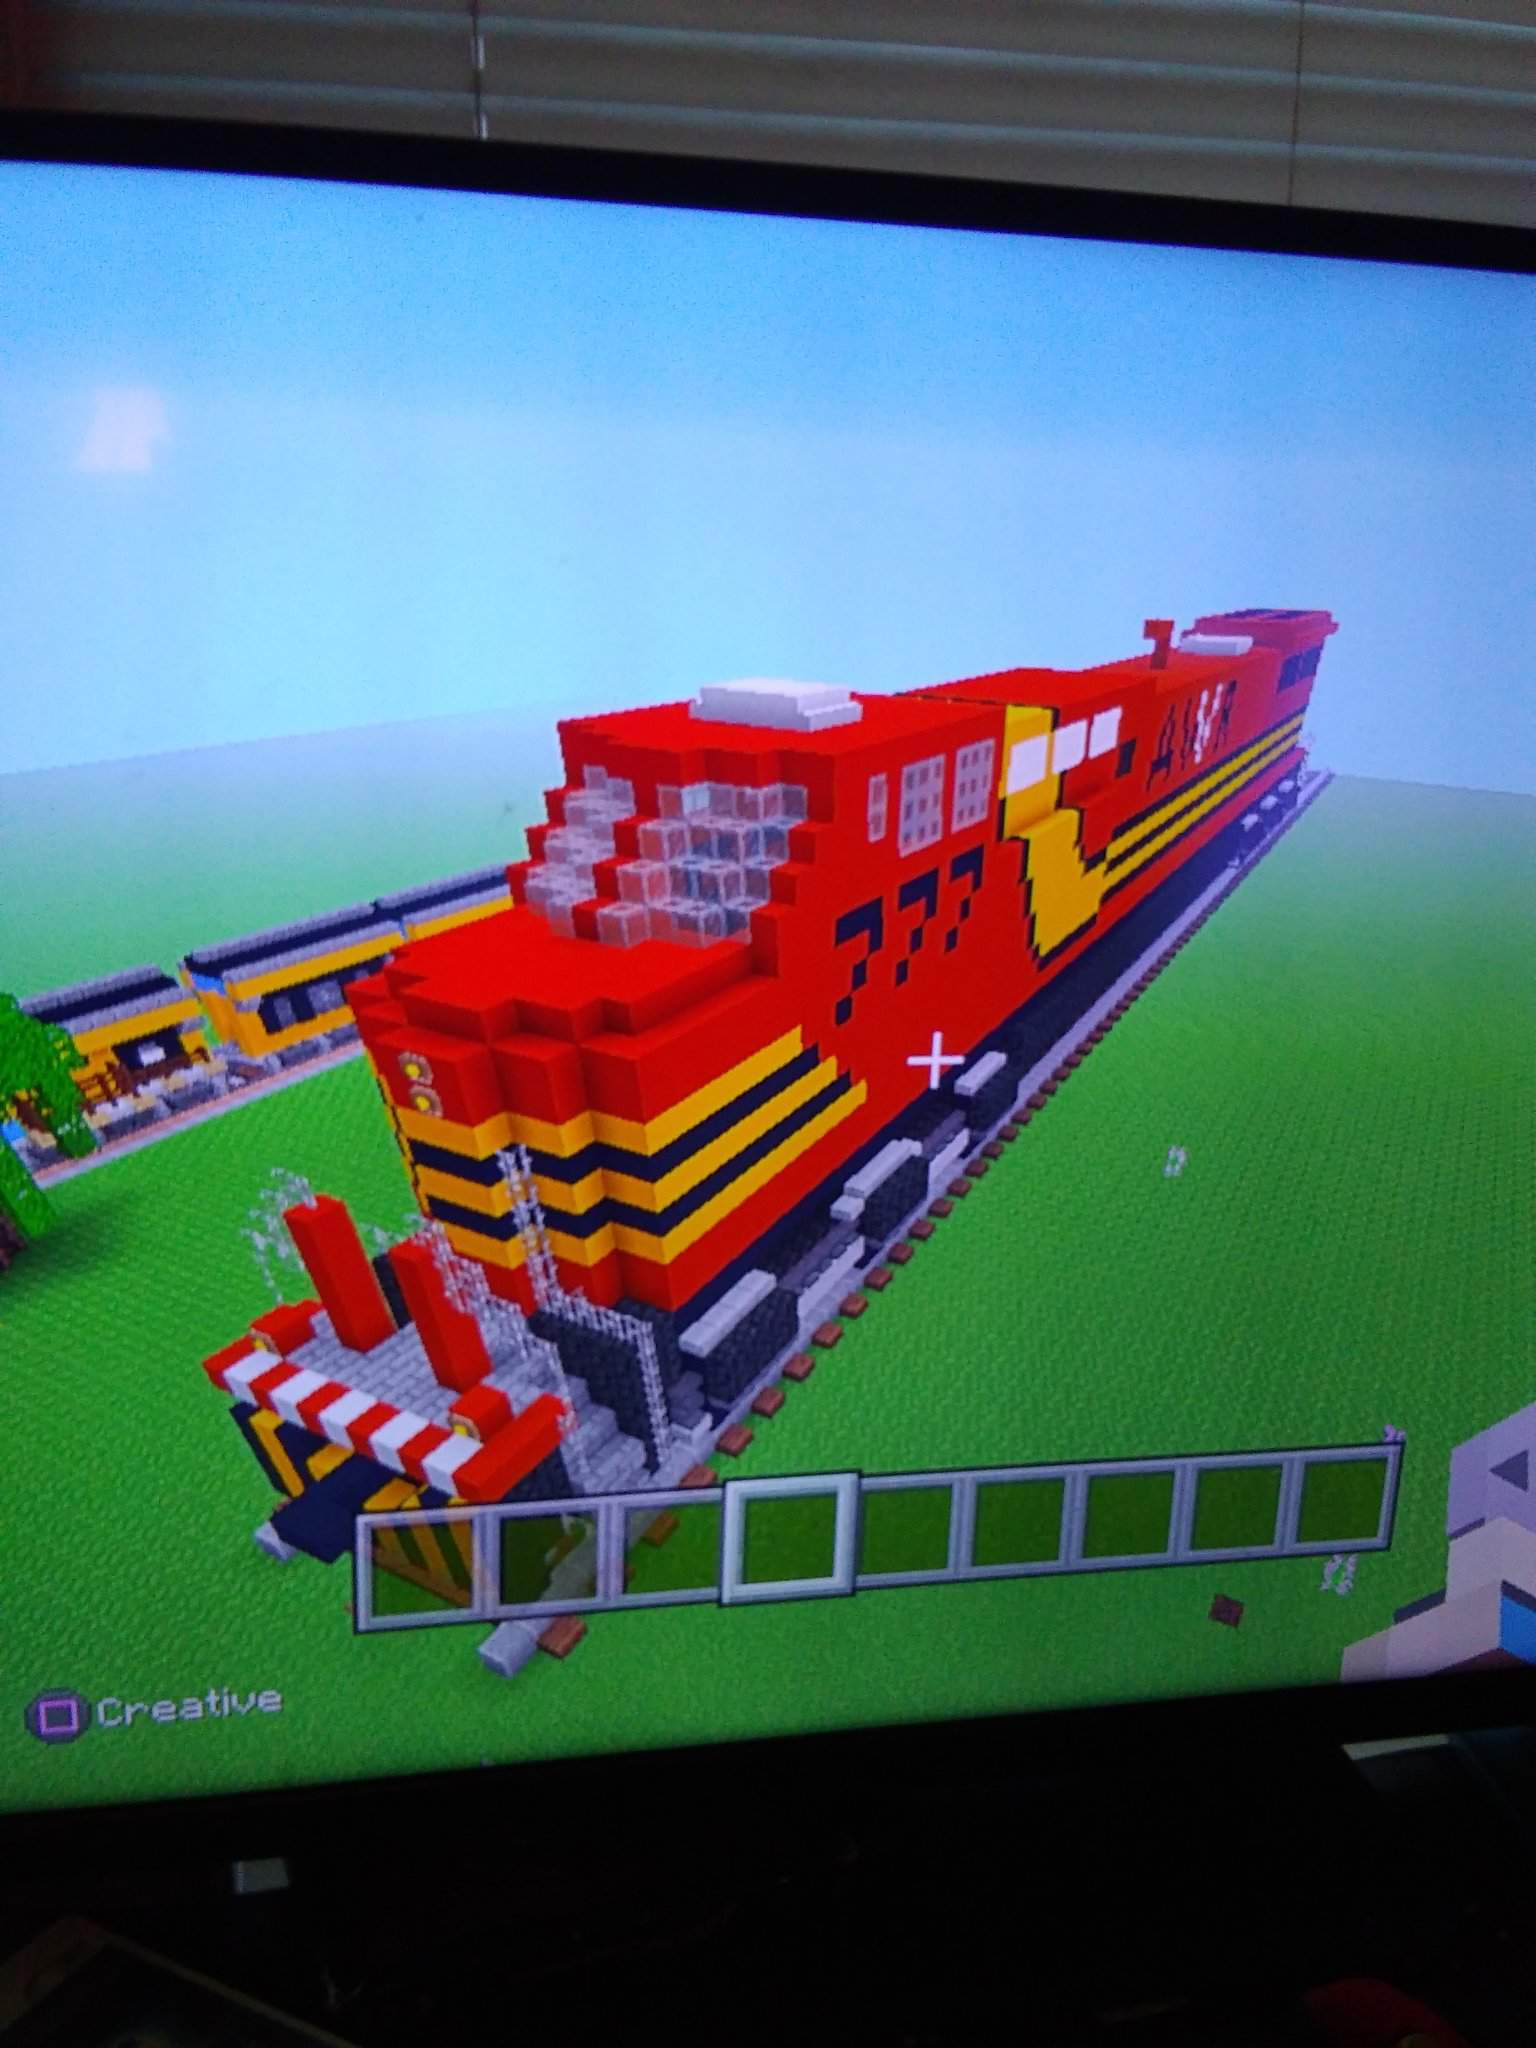 Awvr 777 Is Finally Done All There Is Awvr 767 In Minecraft Ps3 Edition